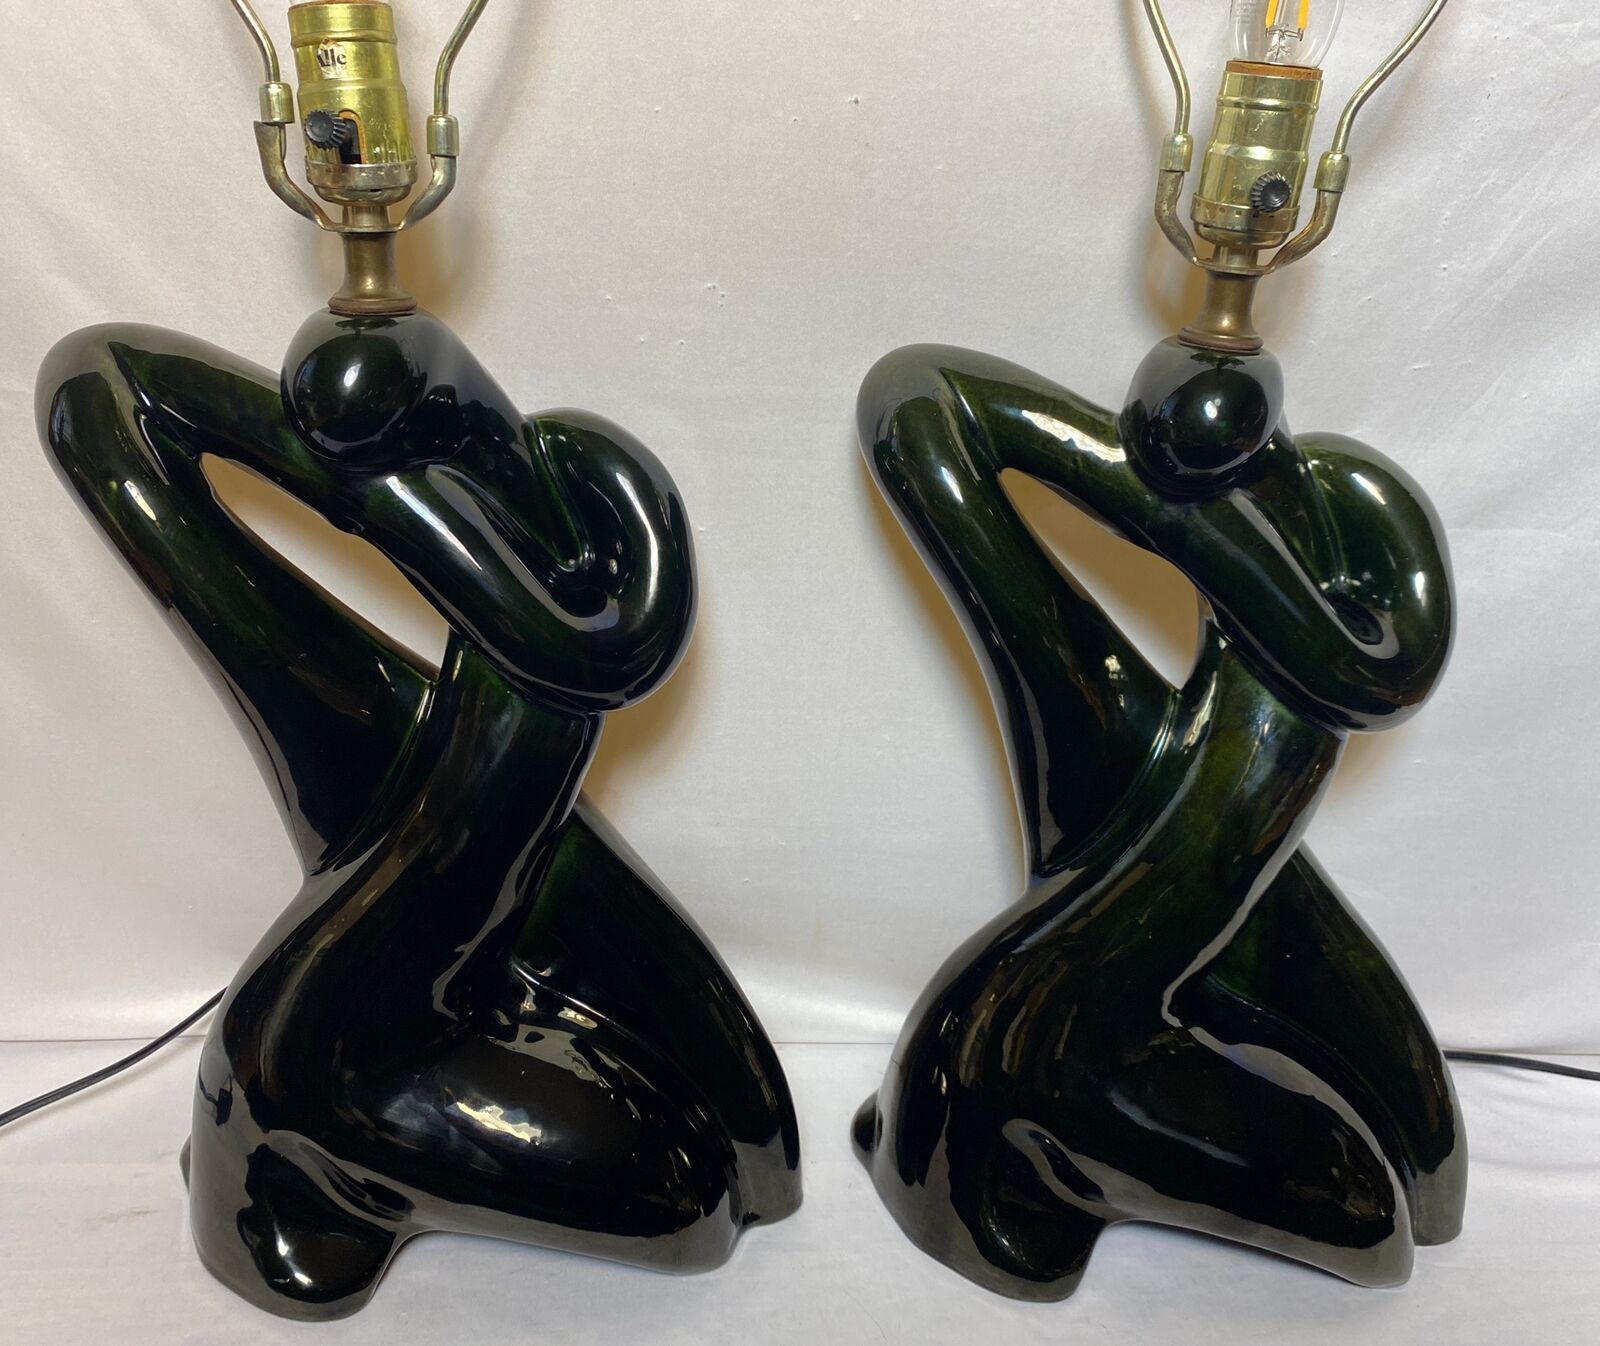 Vintage Pair of Mid Century Ceramic Table Lamps Abstract Freeform Green Black